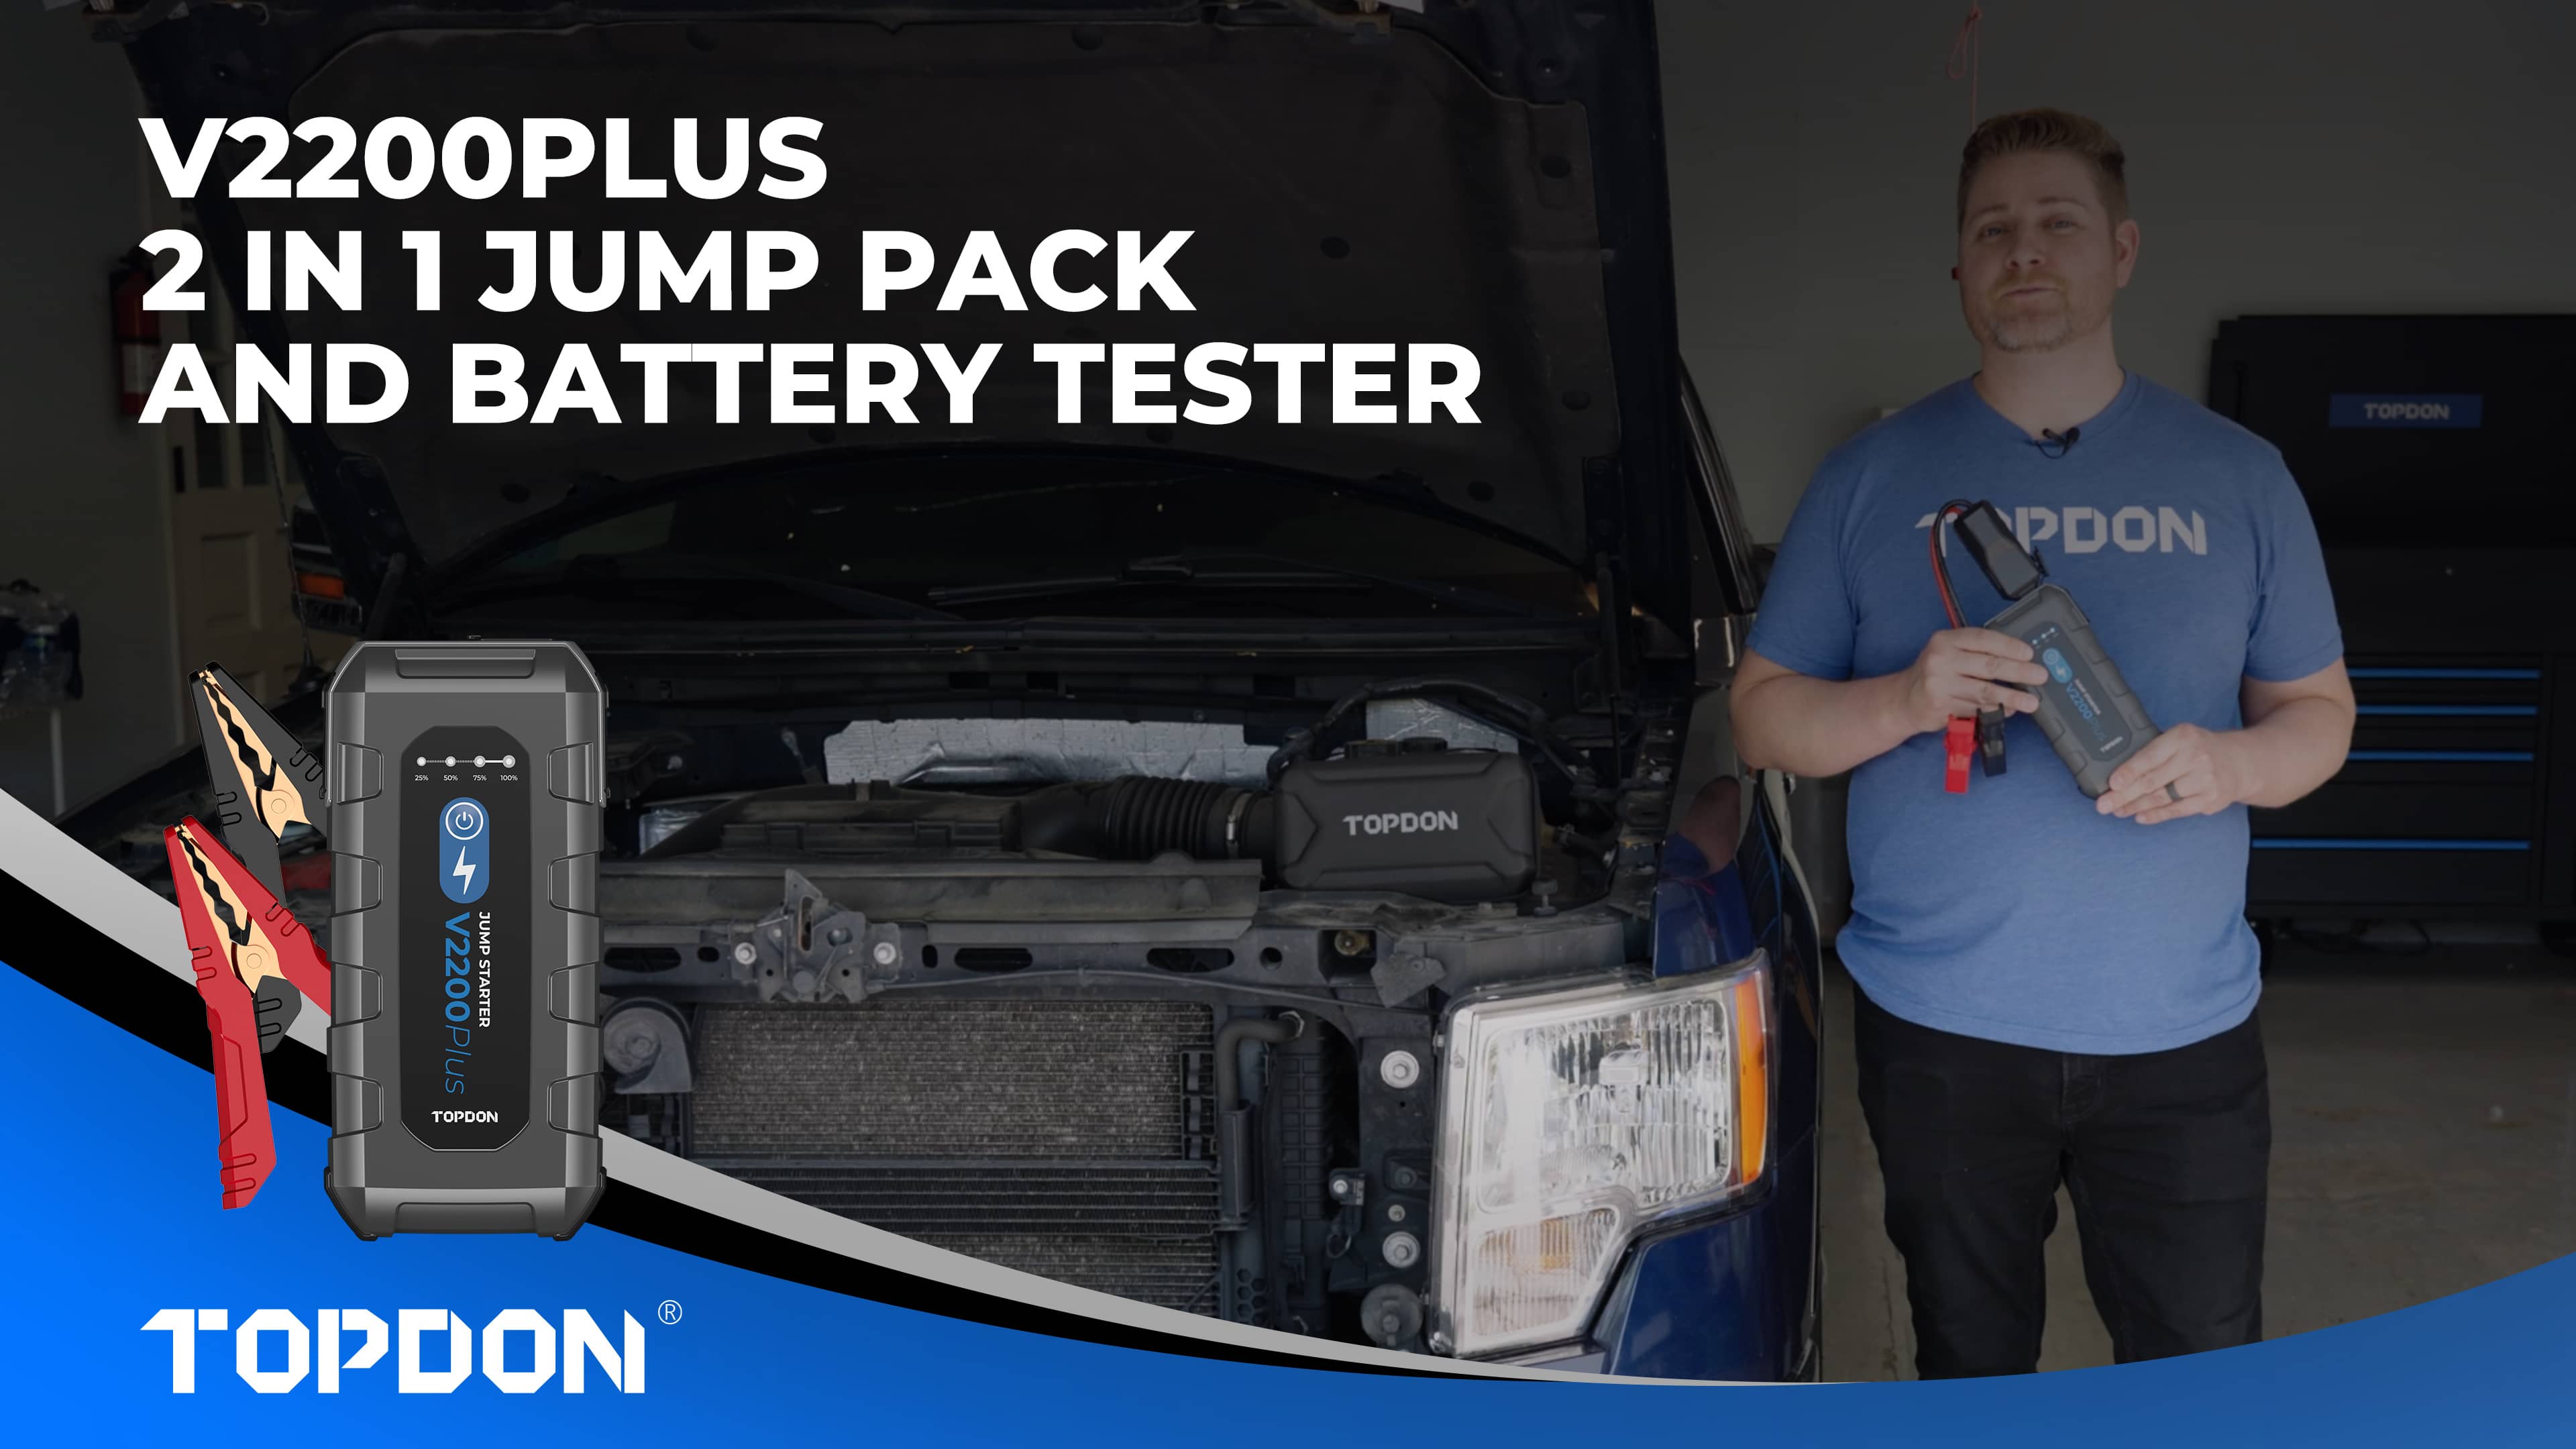 TOPDON V2200Plus Overview | 2 In 1 Jump Pack And Battery Tester